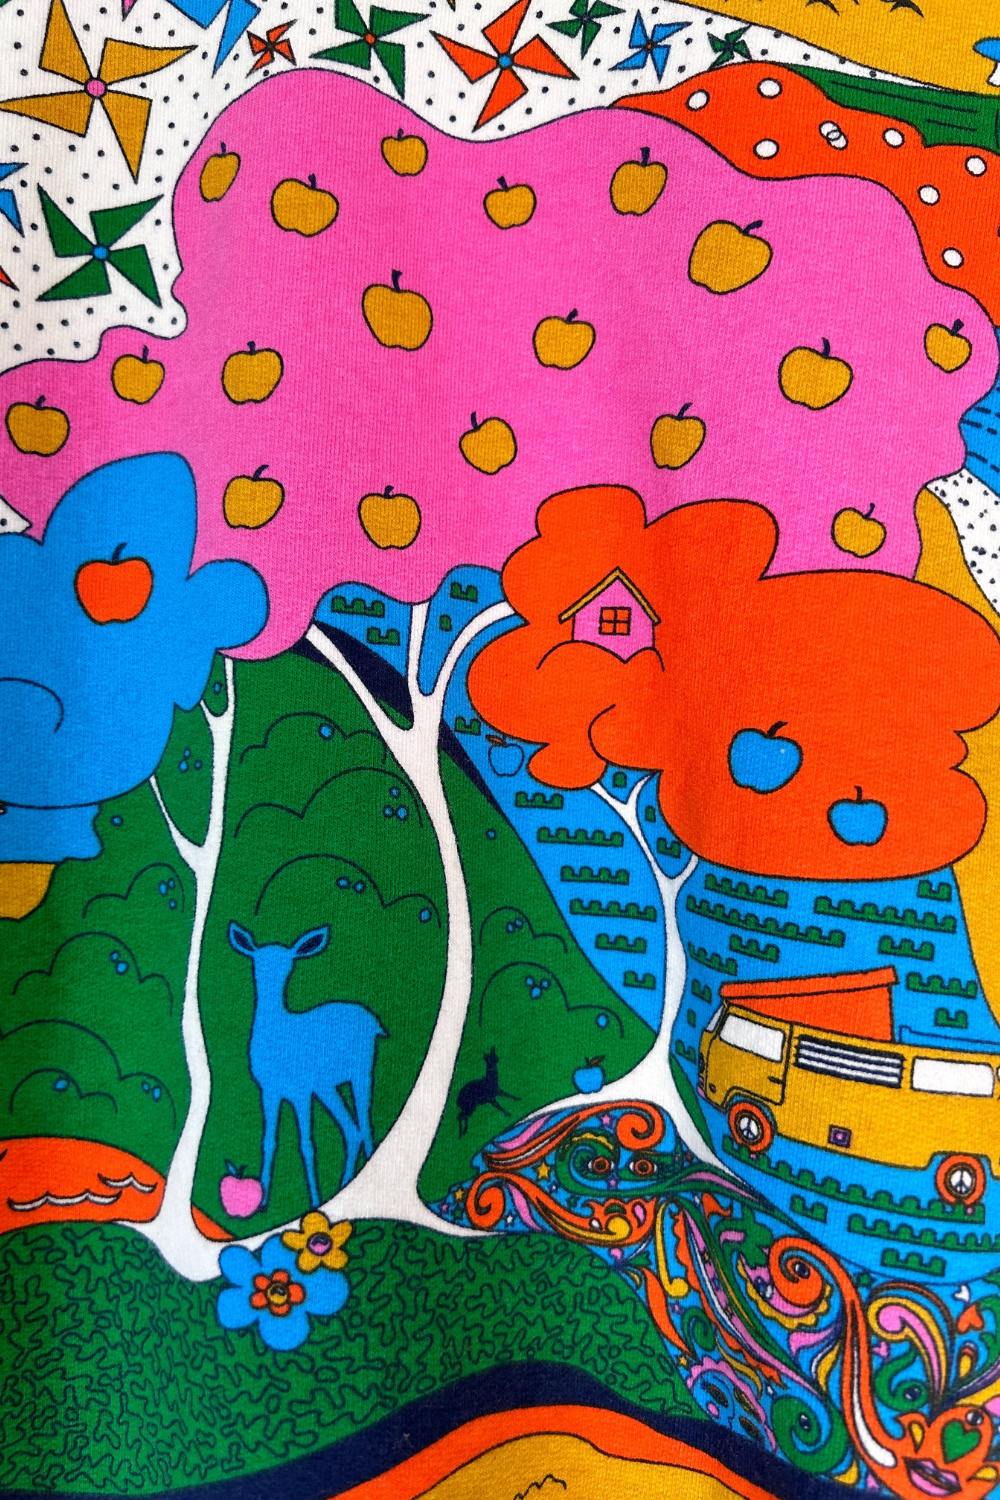 Closeup of rainbow landscape print with trees, deer, and VW bus